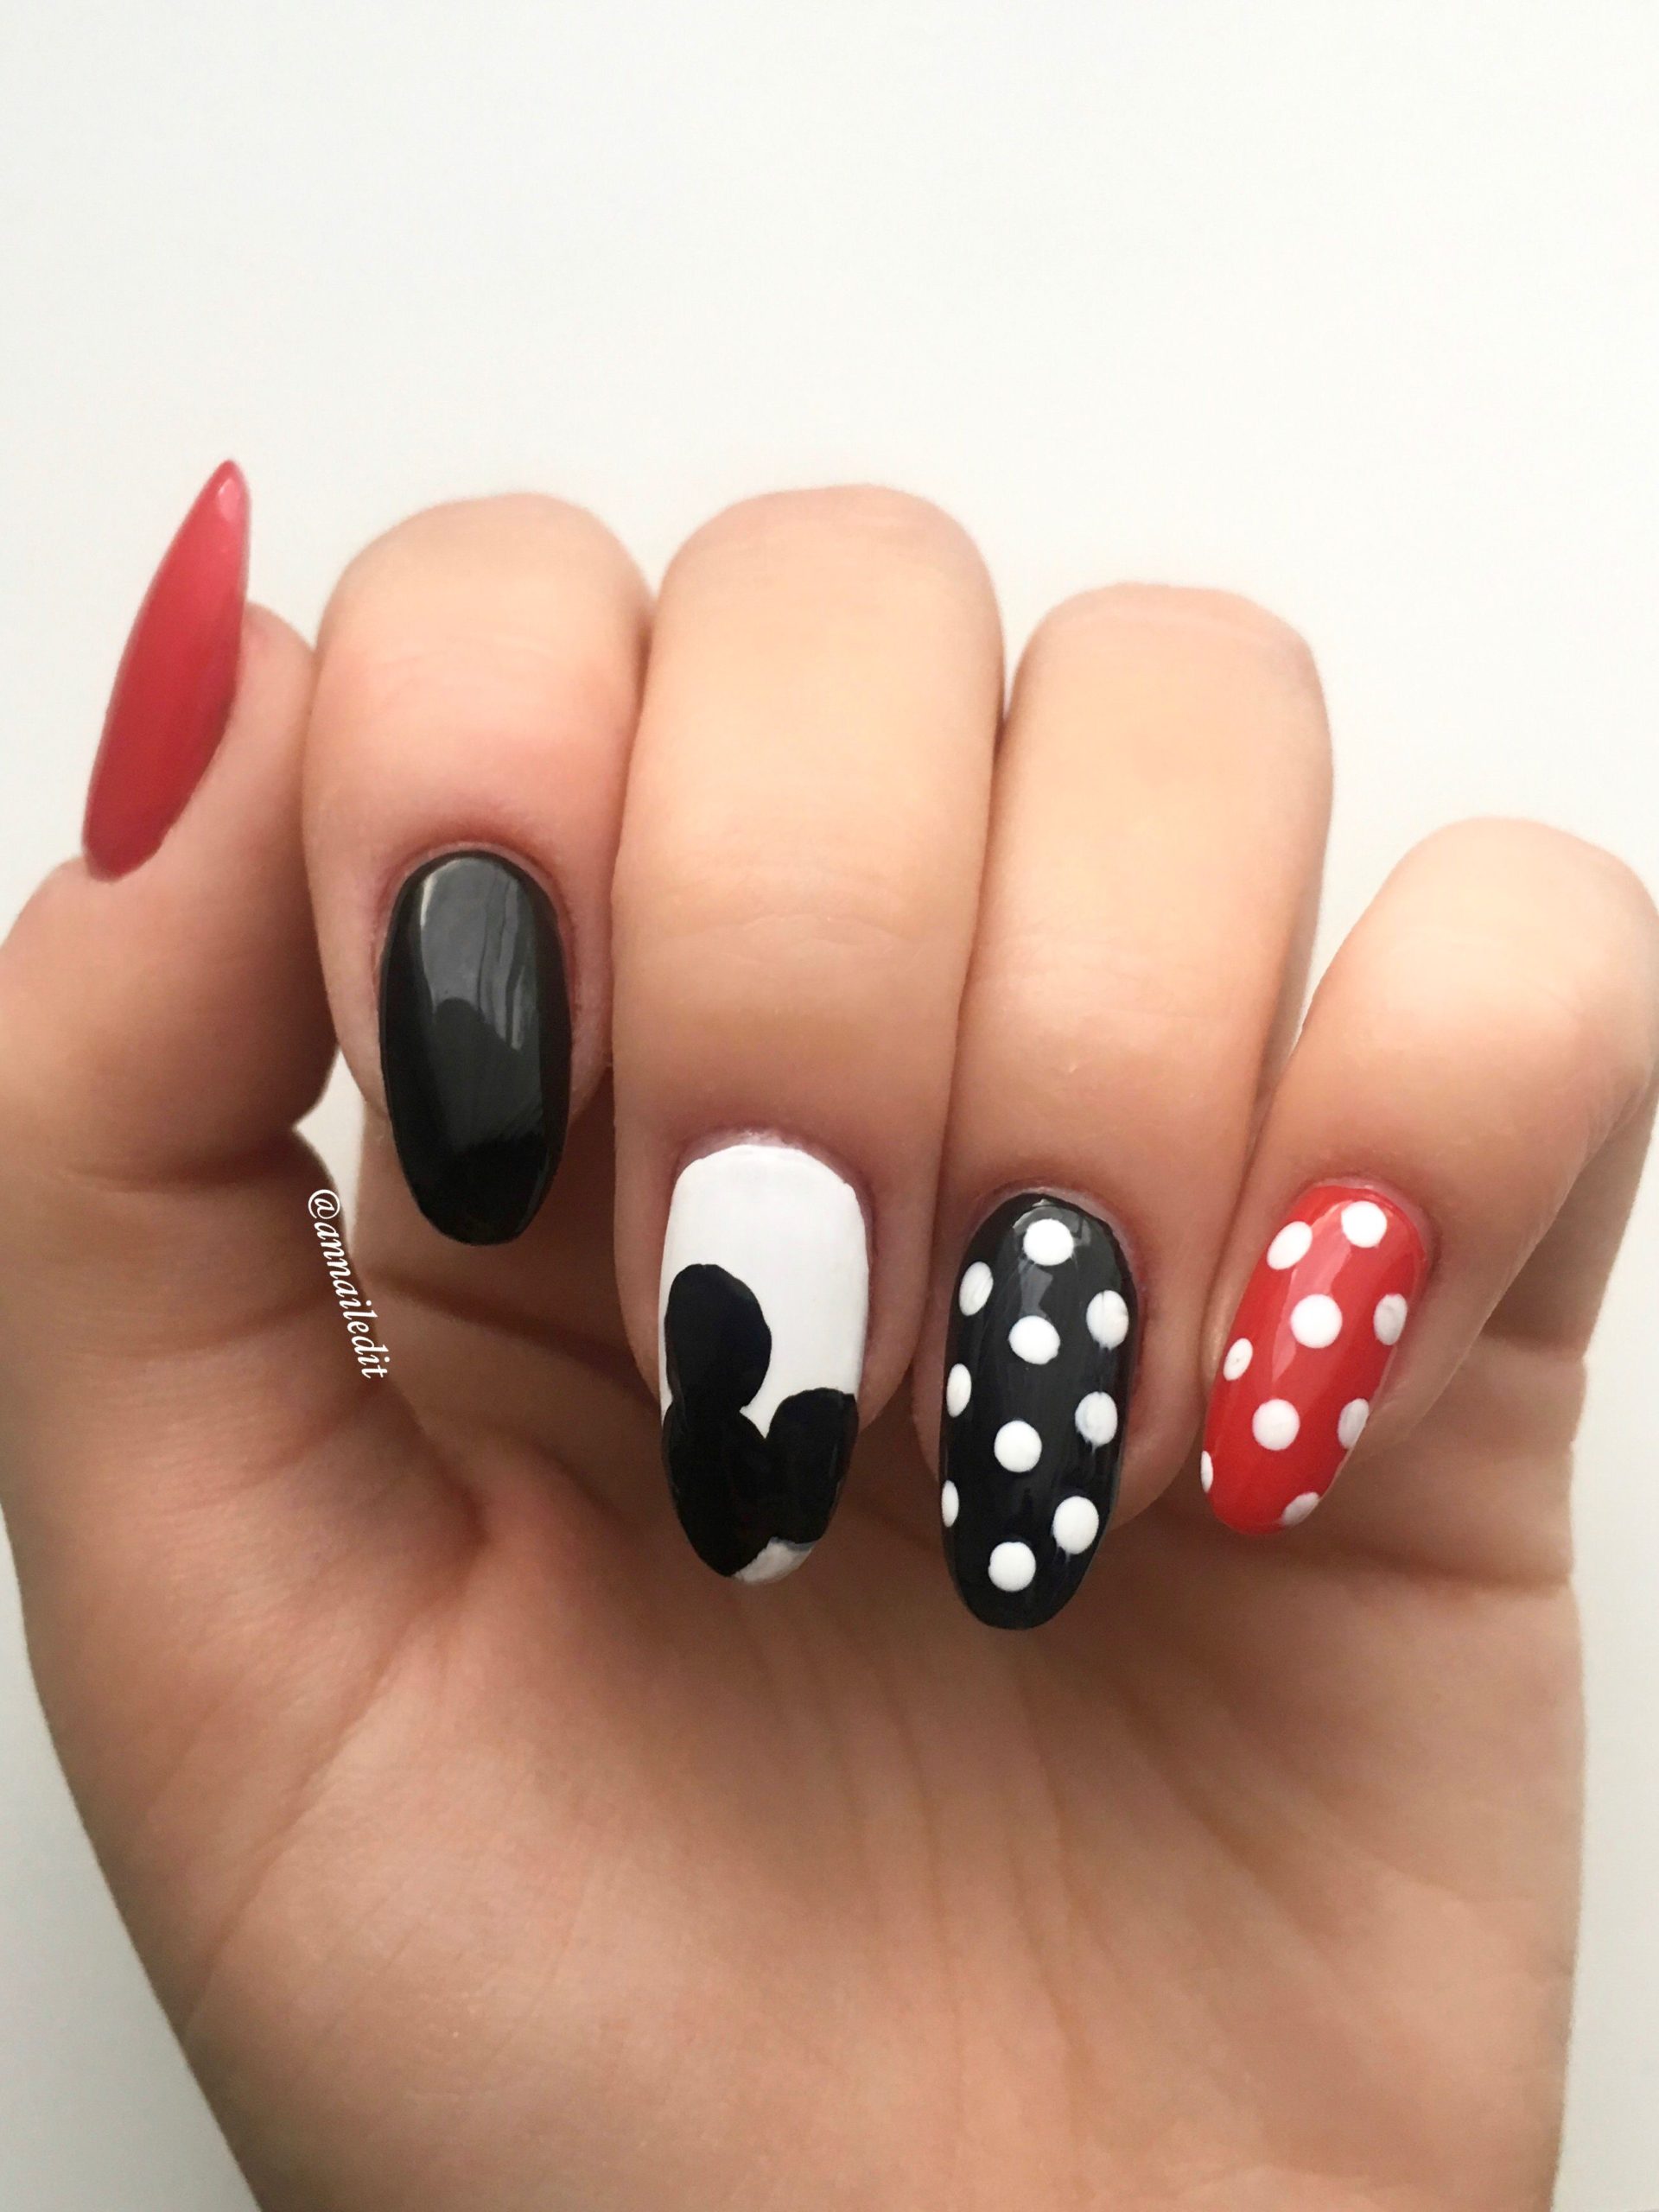 UPDATED] 30+ Awesome Mickey Mouse Nail Designs